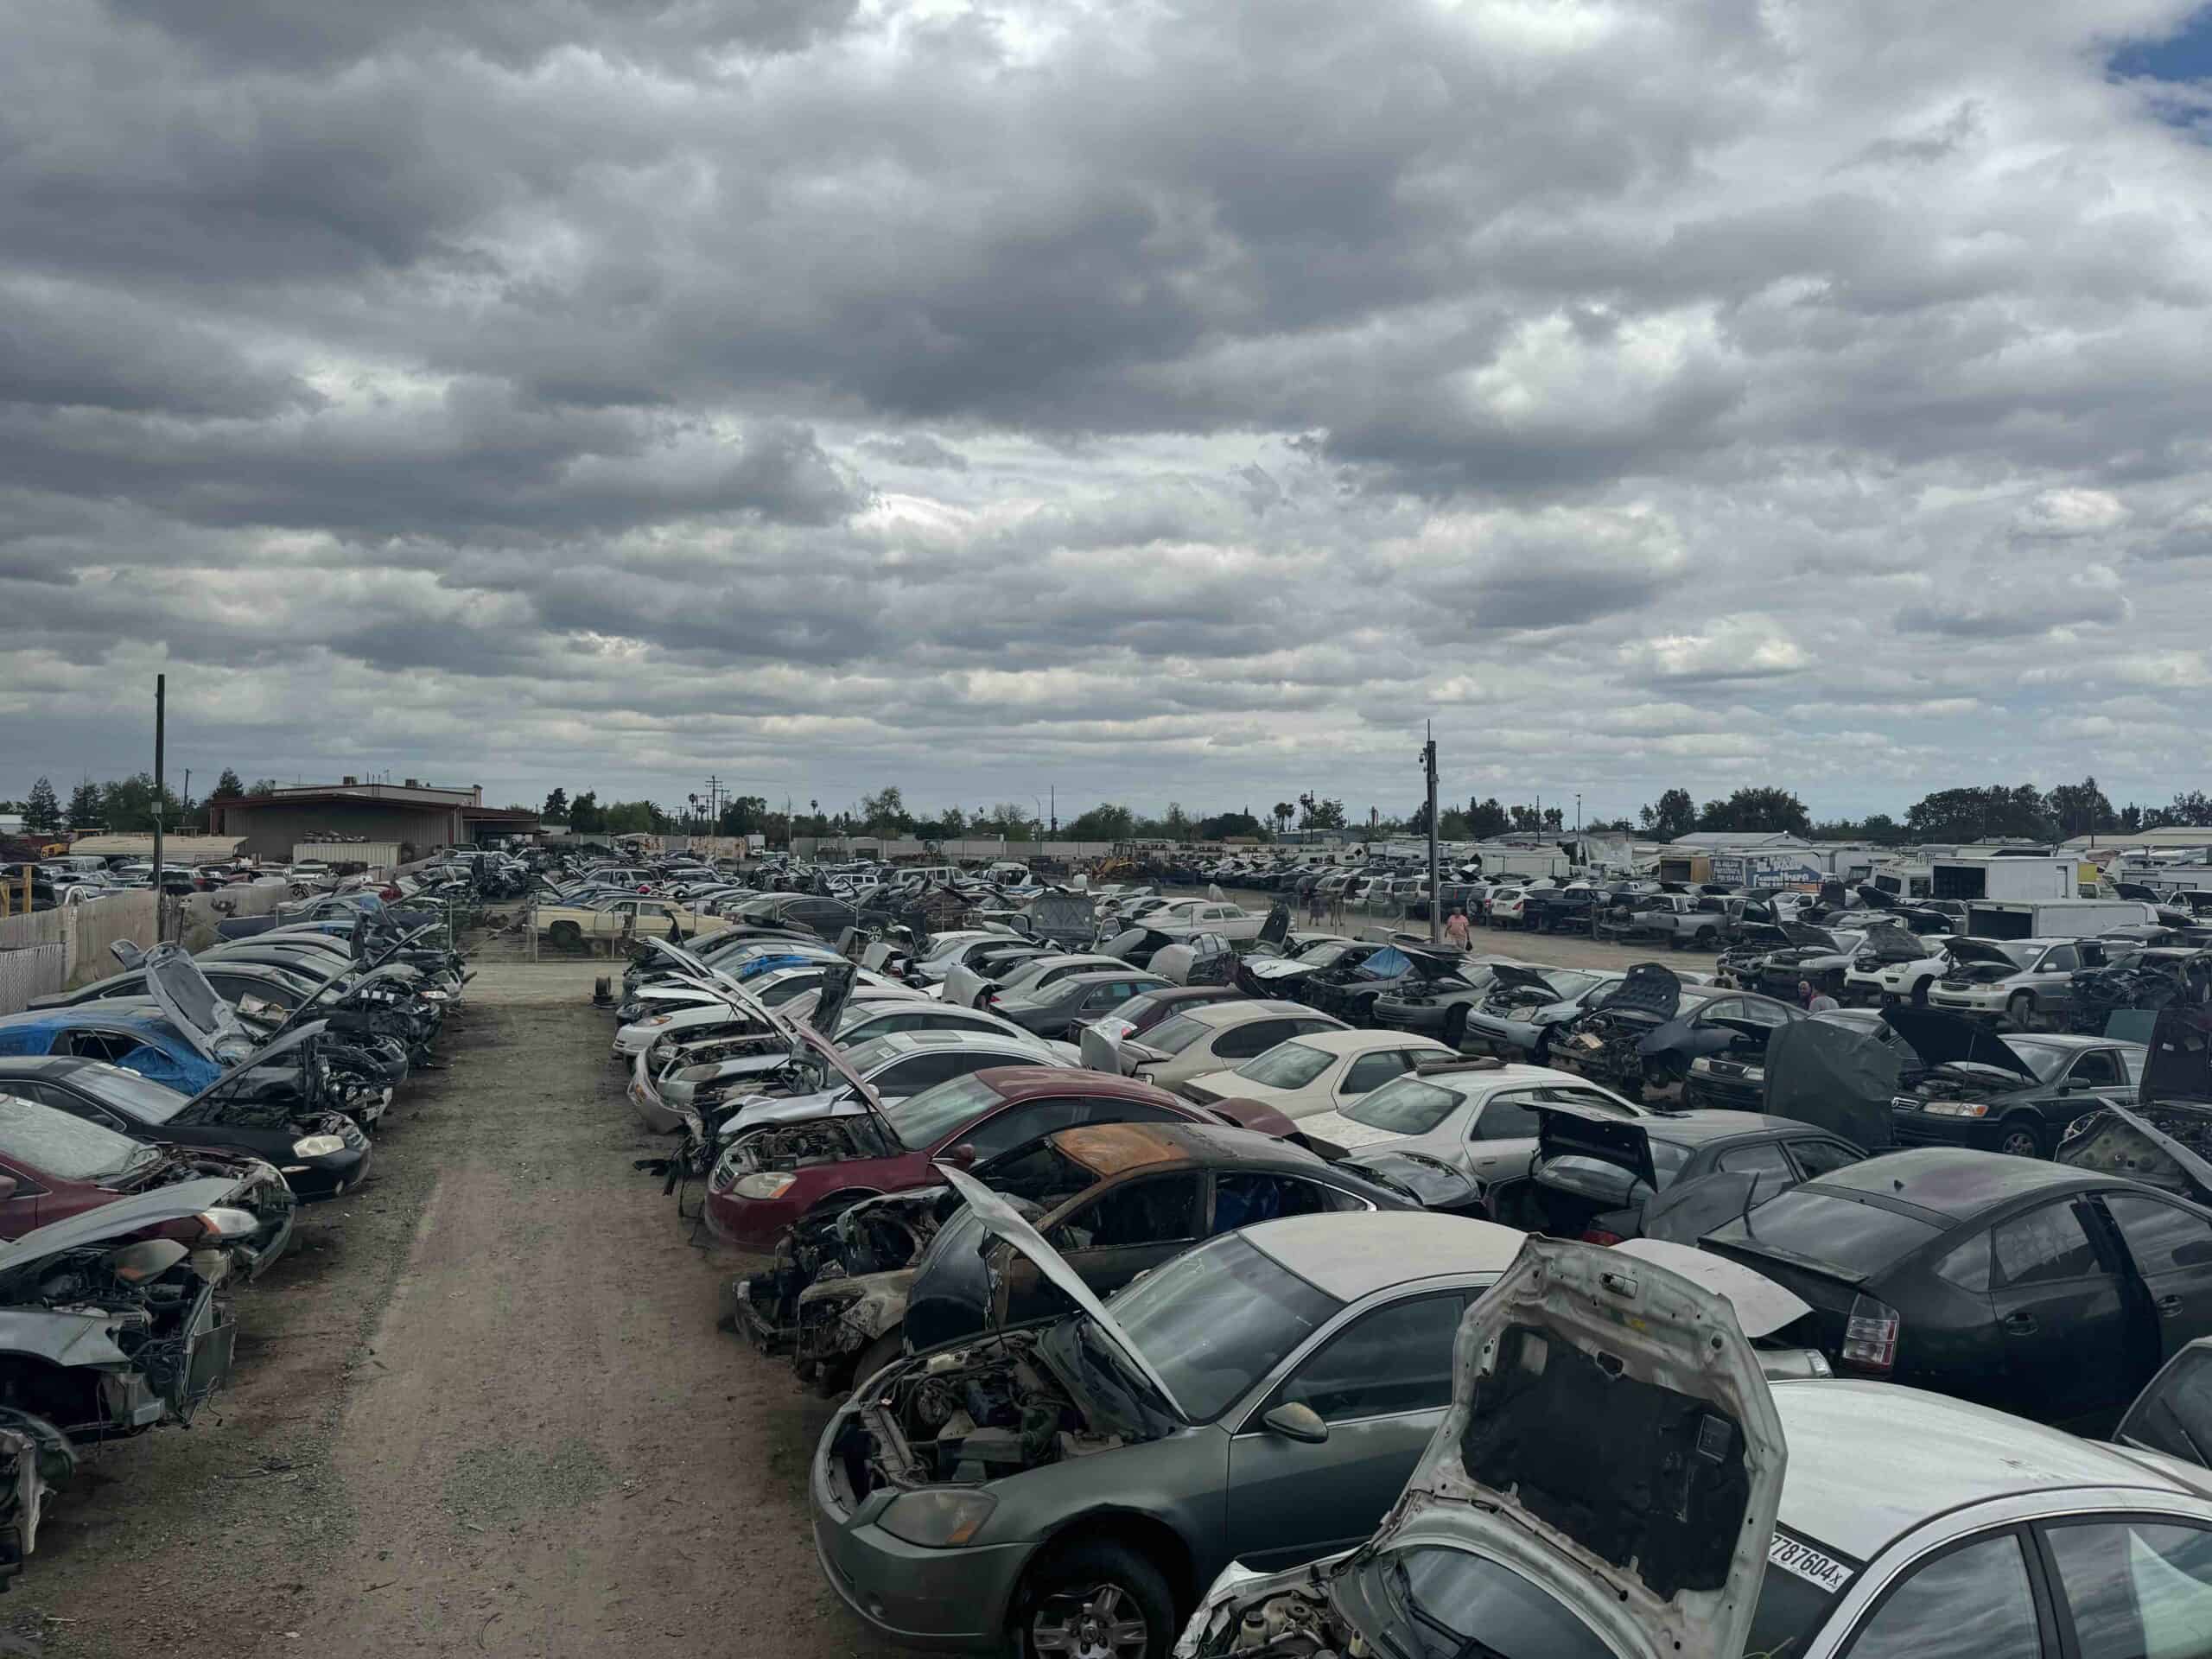 Westside Auto Dismantlers Fresno yard view of junk cars